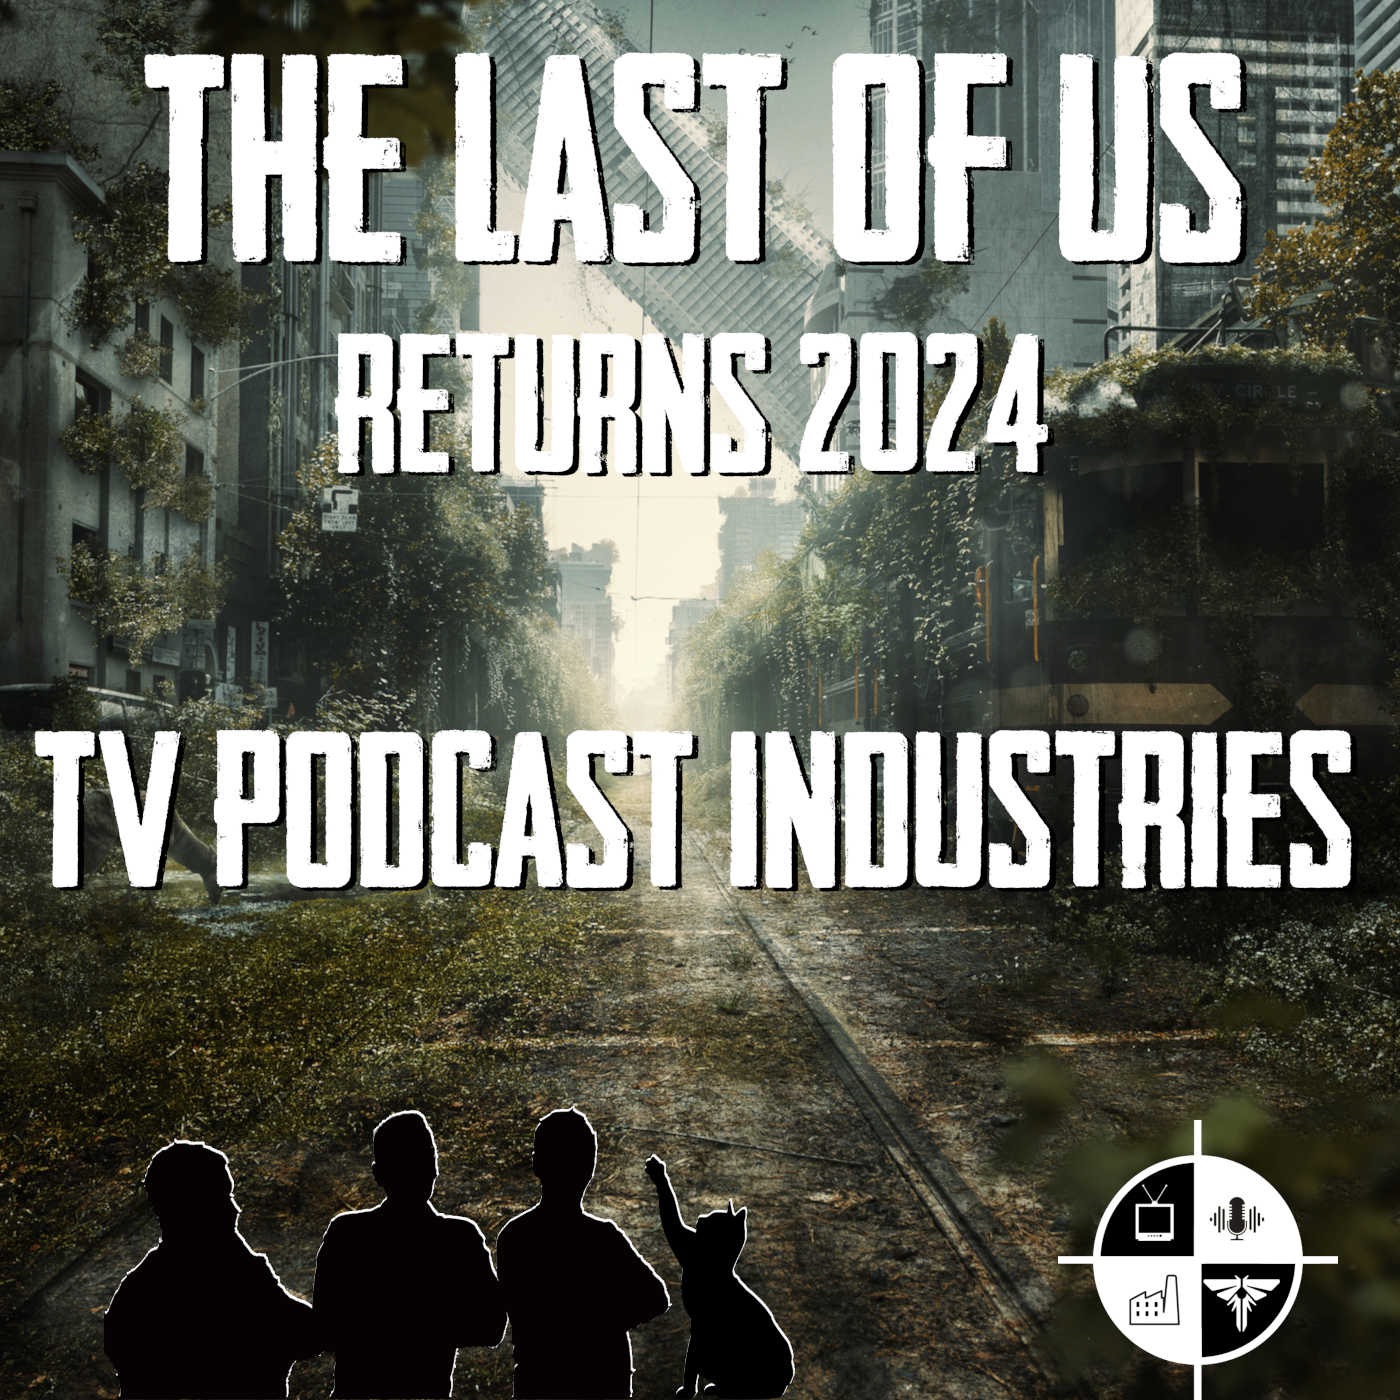 Episode 4 - “Please Hold To My Hand”, The Last of Us Podcast